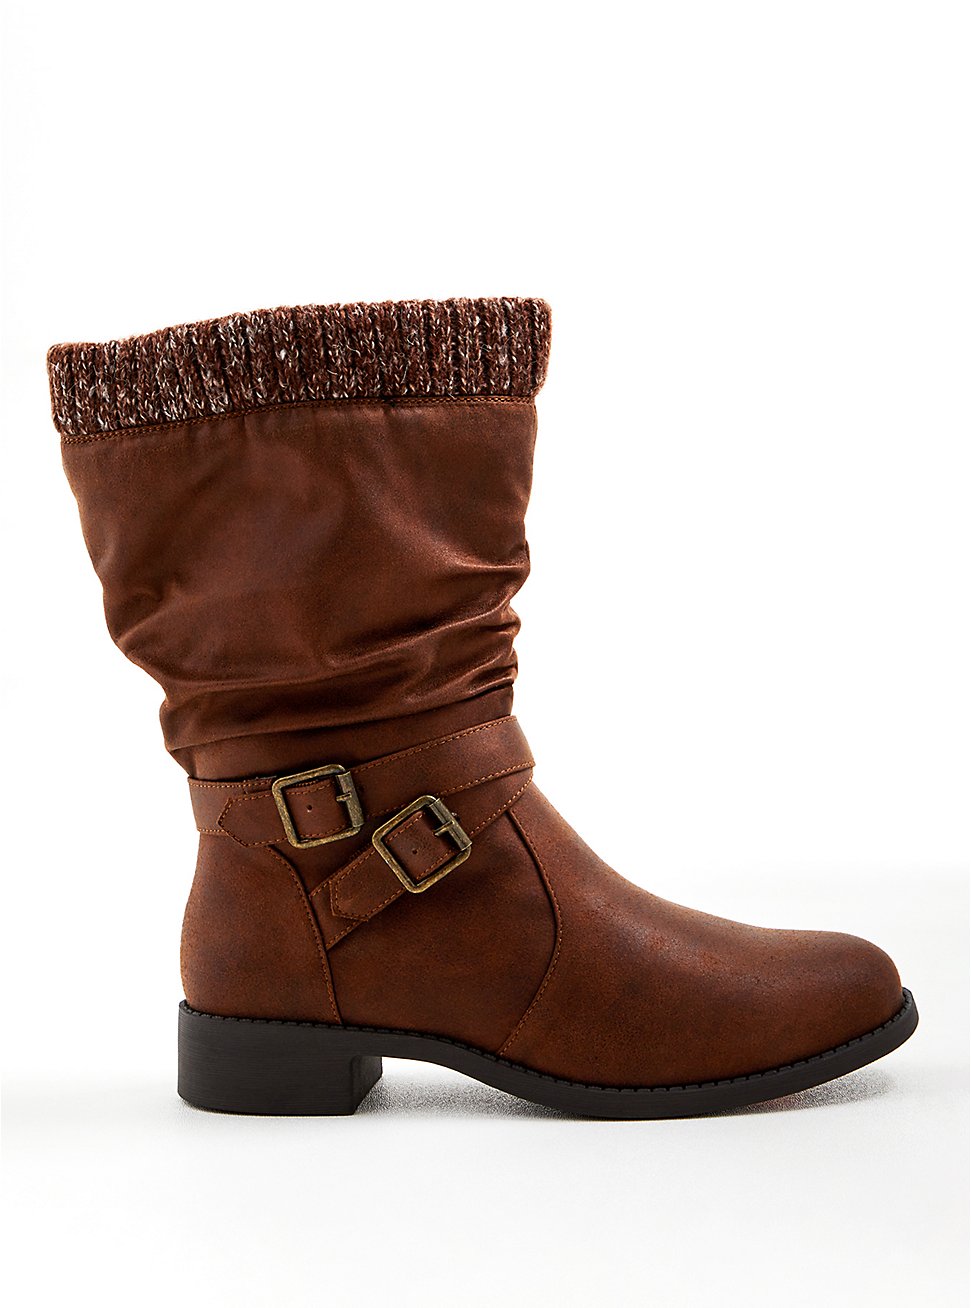 Brown Faux Suede Sweater-Trim Boot (WW), BROWN, hi-res